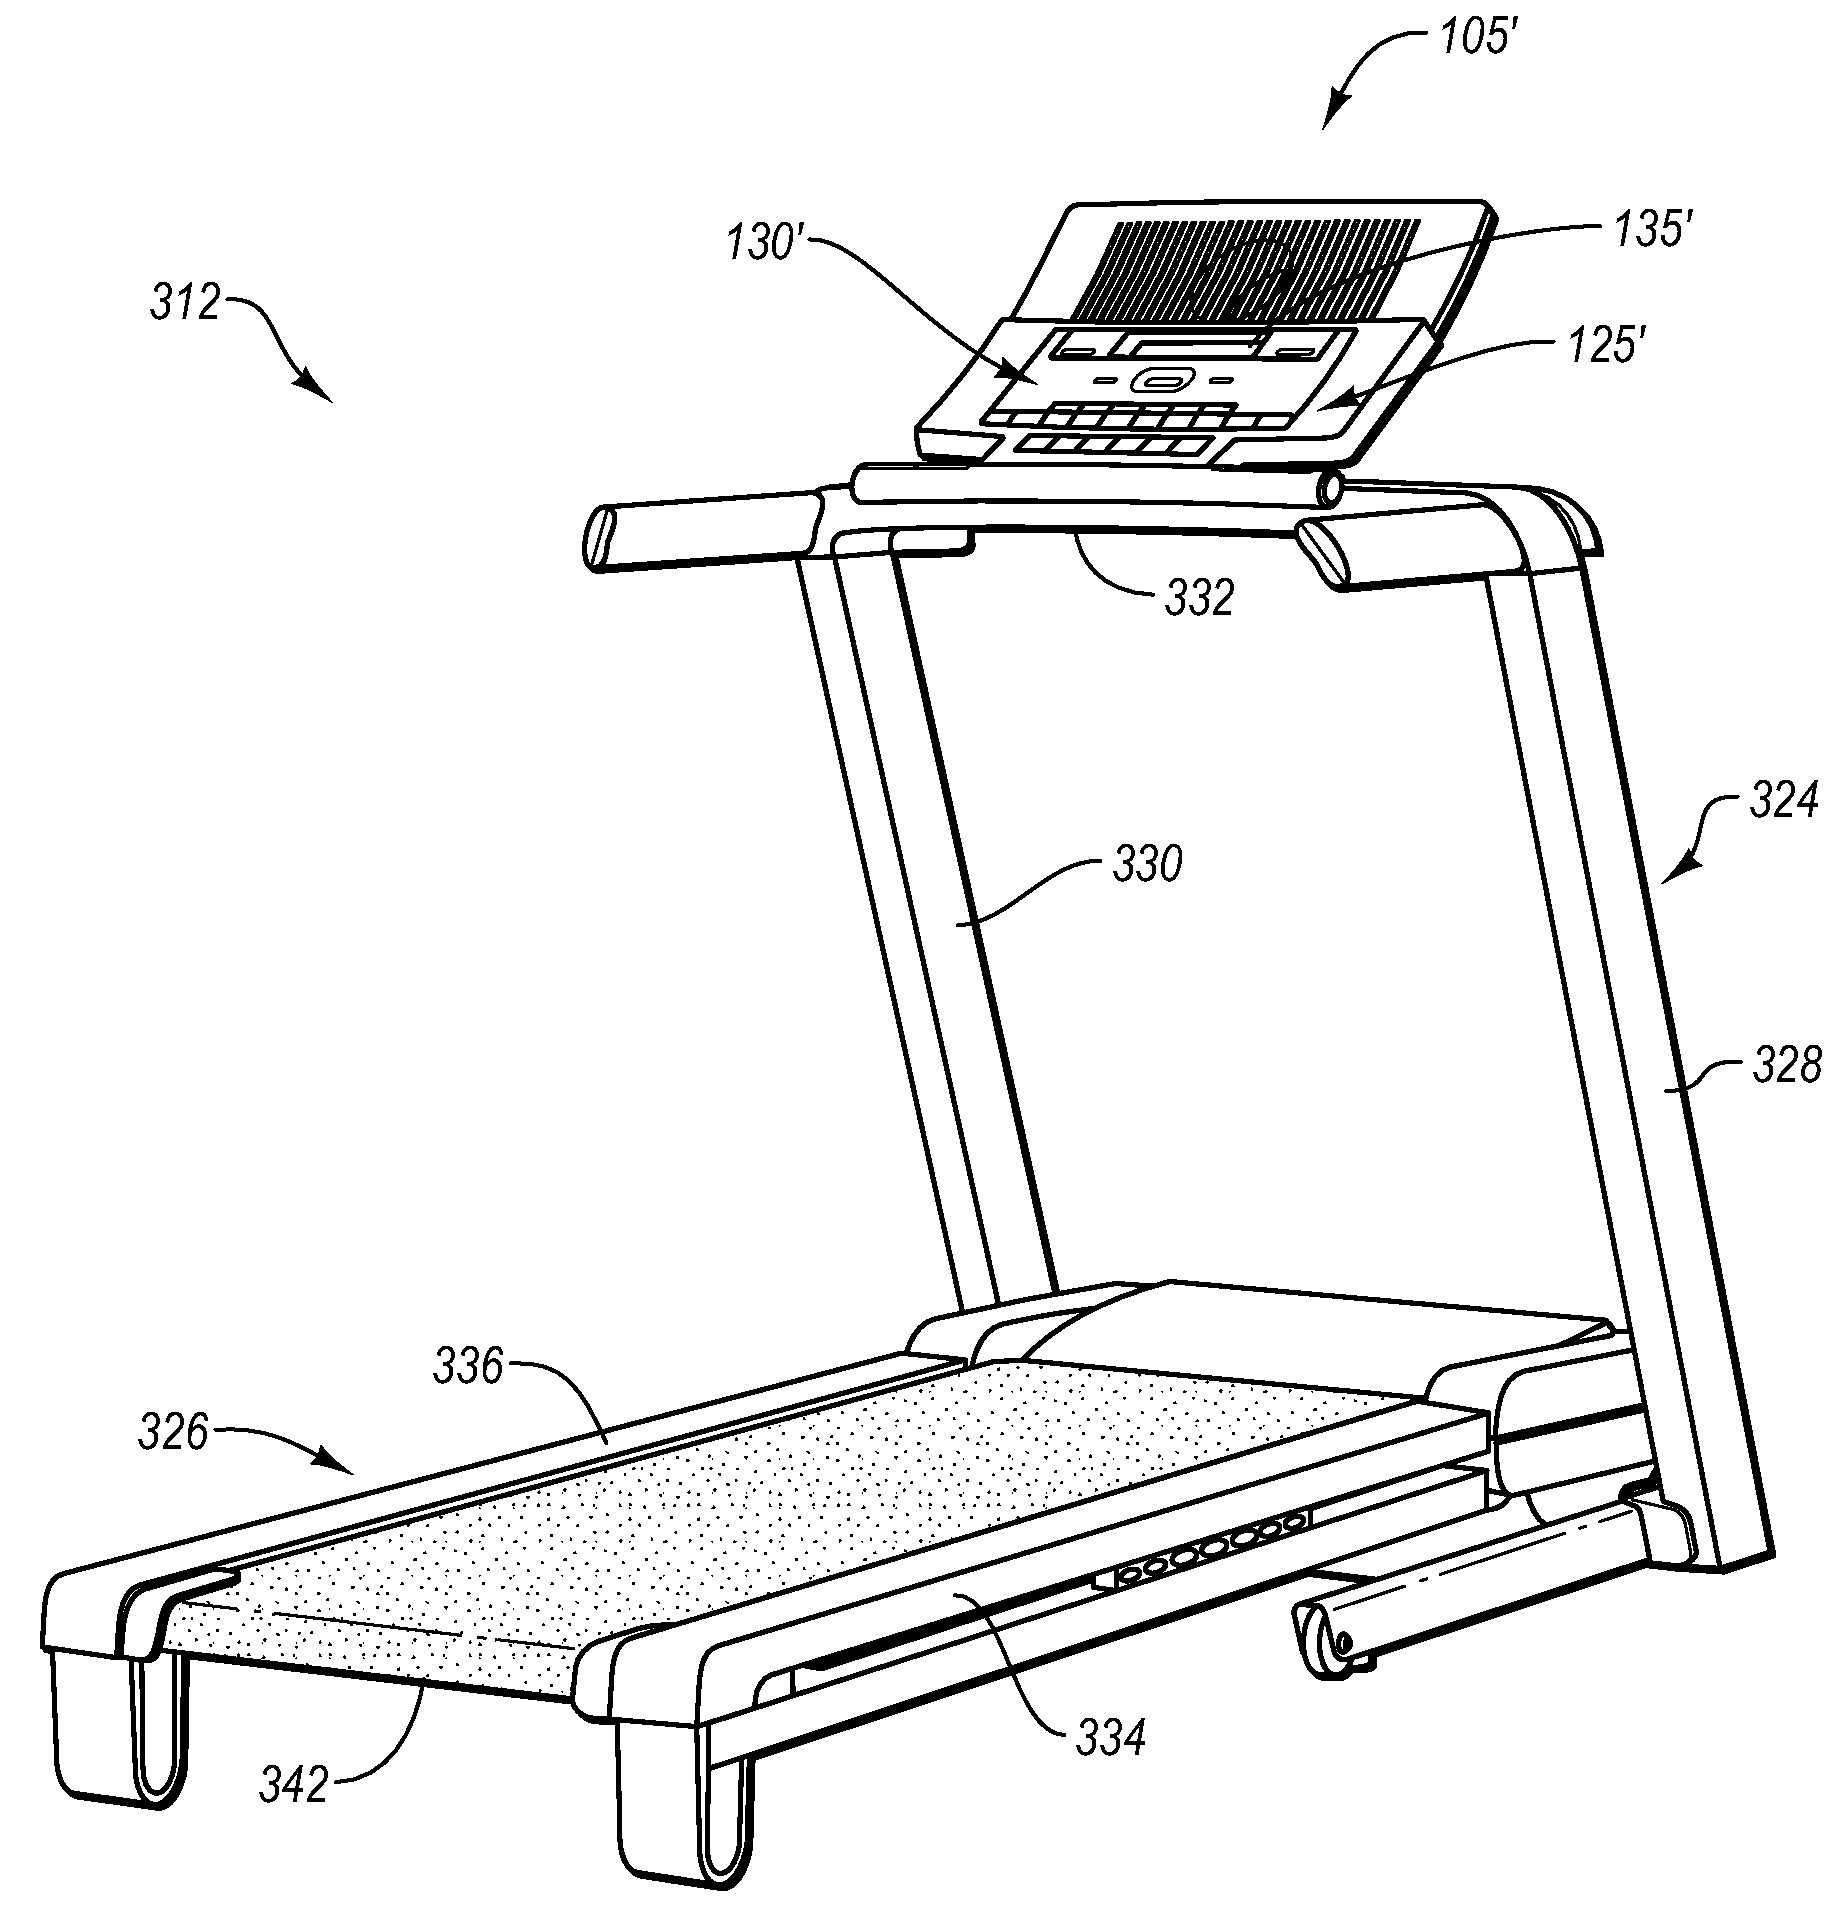 Exercise device with exercise log and journal